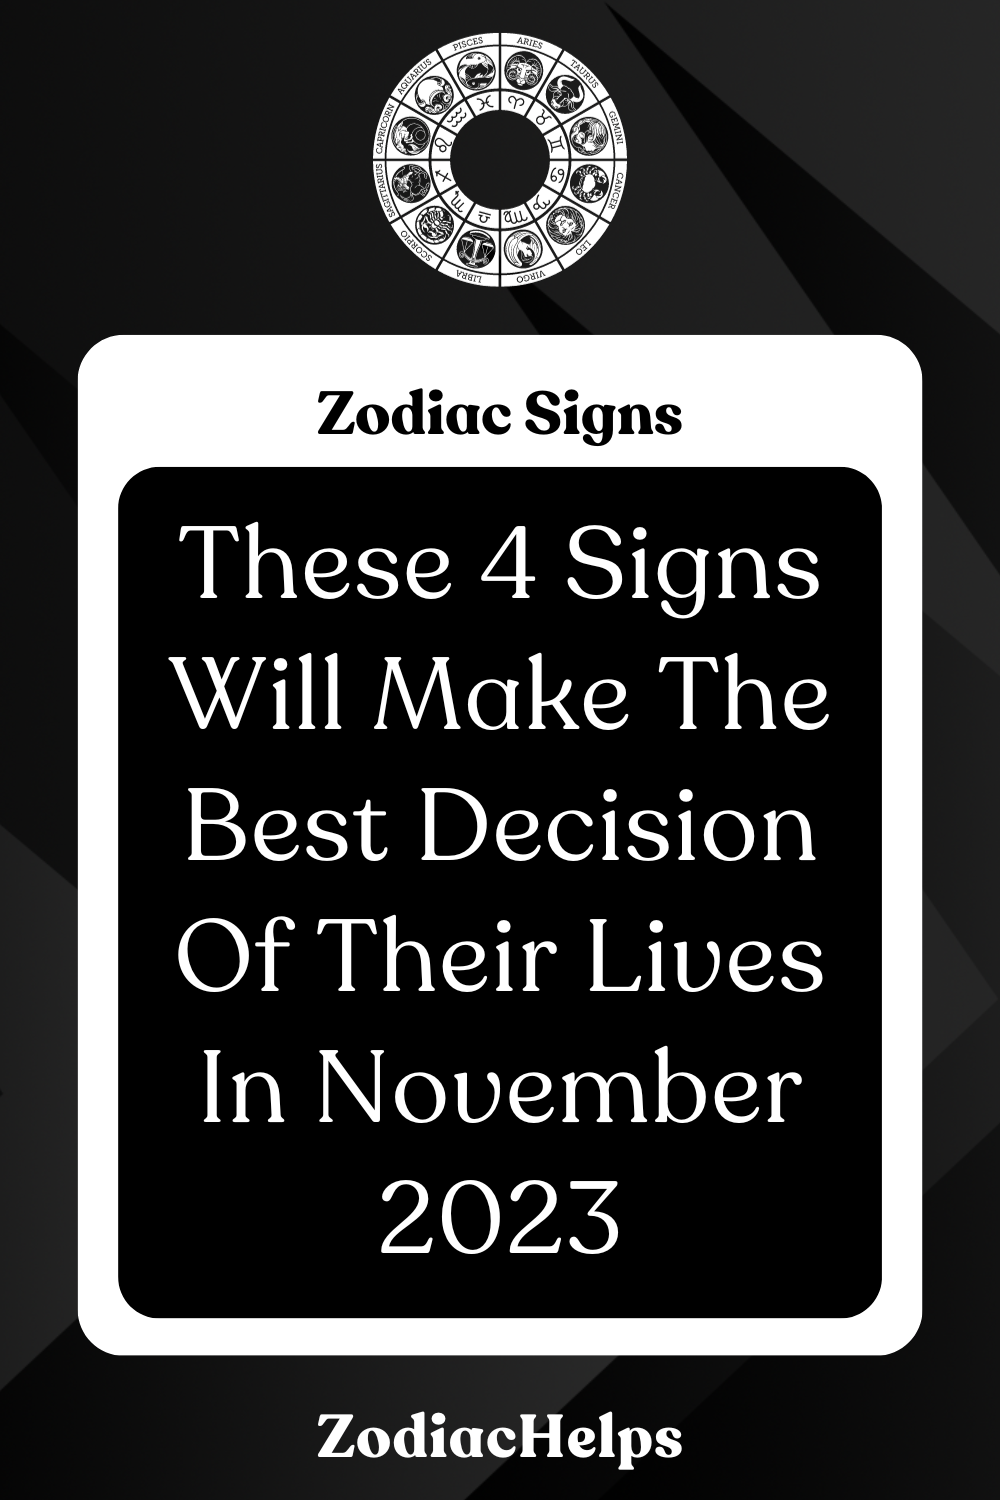 These 4 Signs Will Make The Best Decision Of Their Lives In November 2023